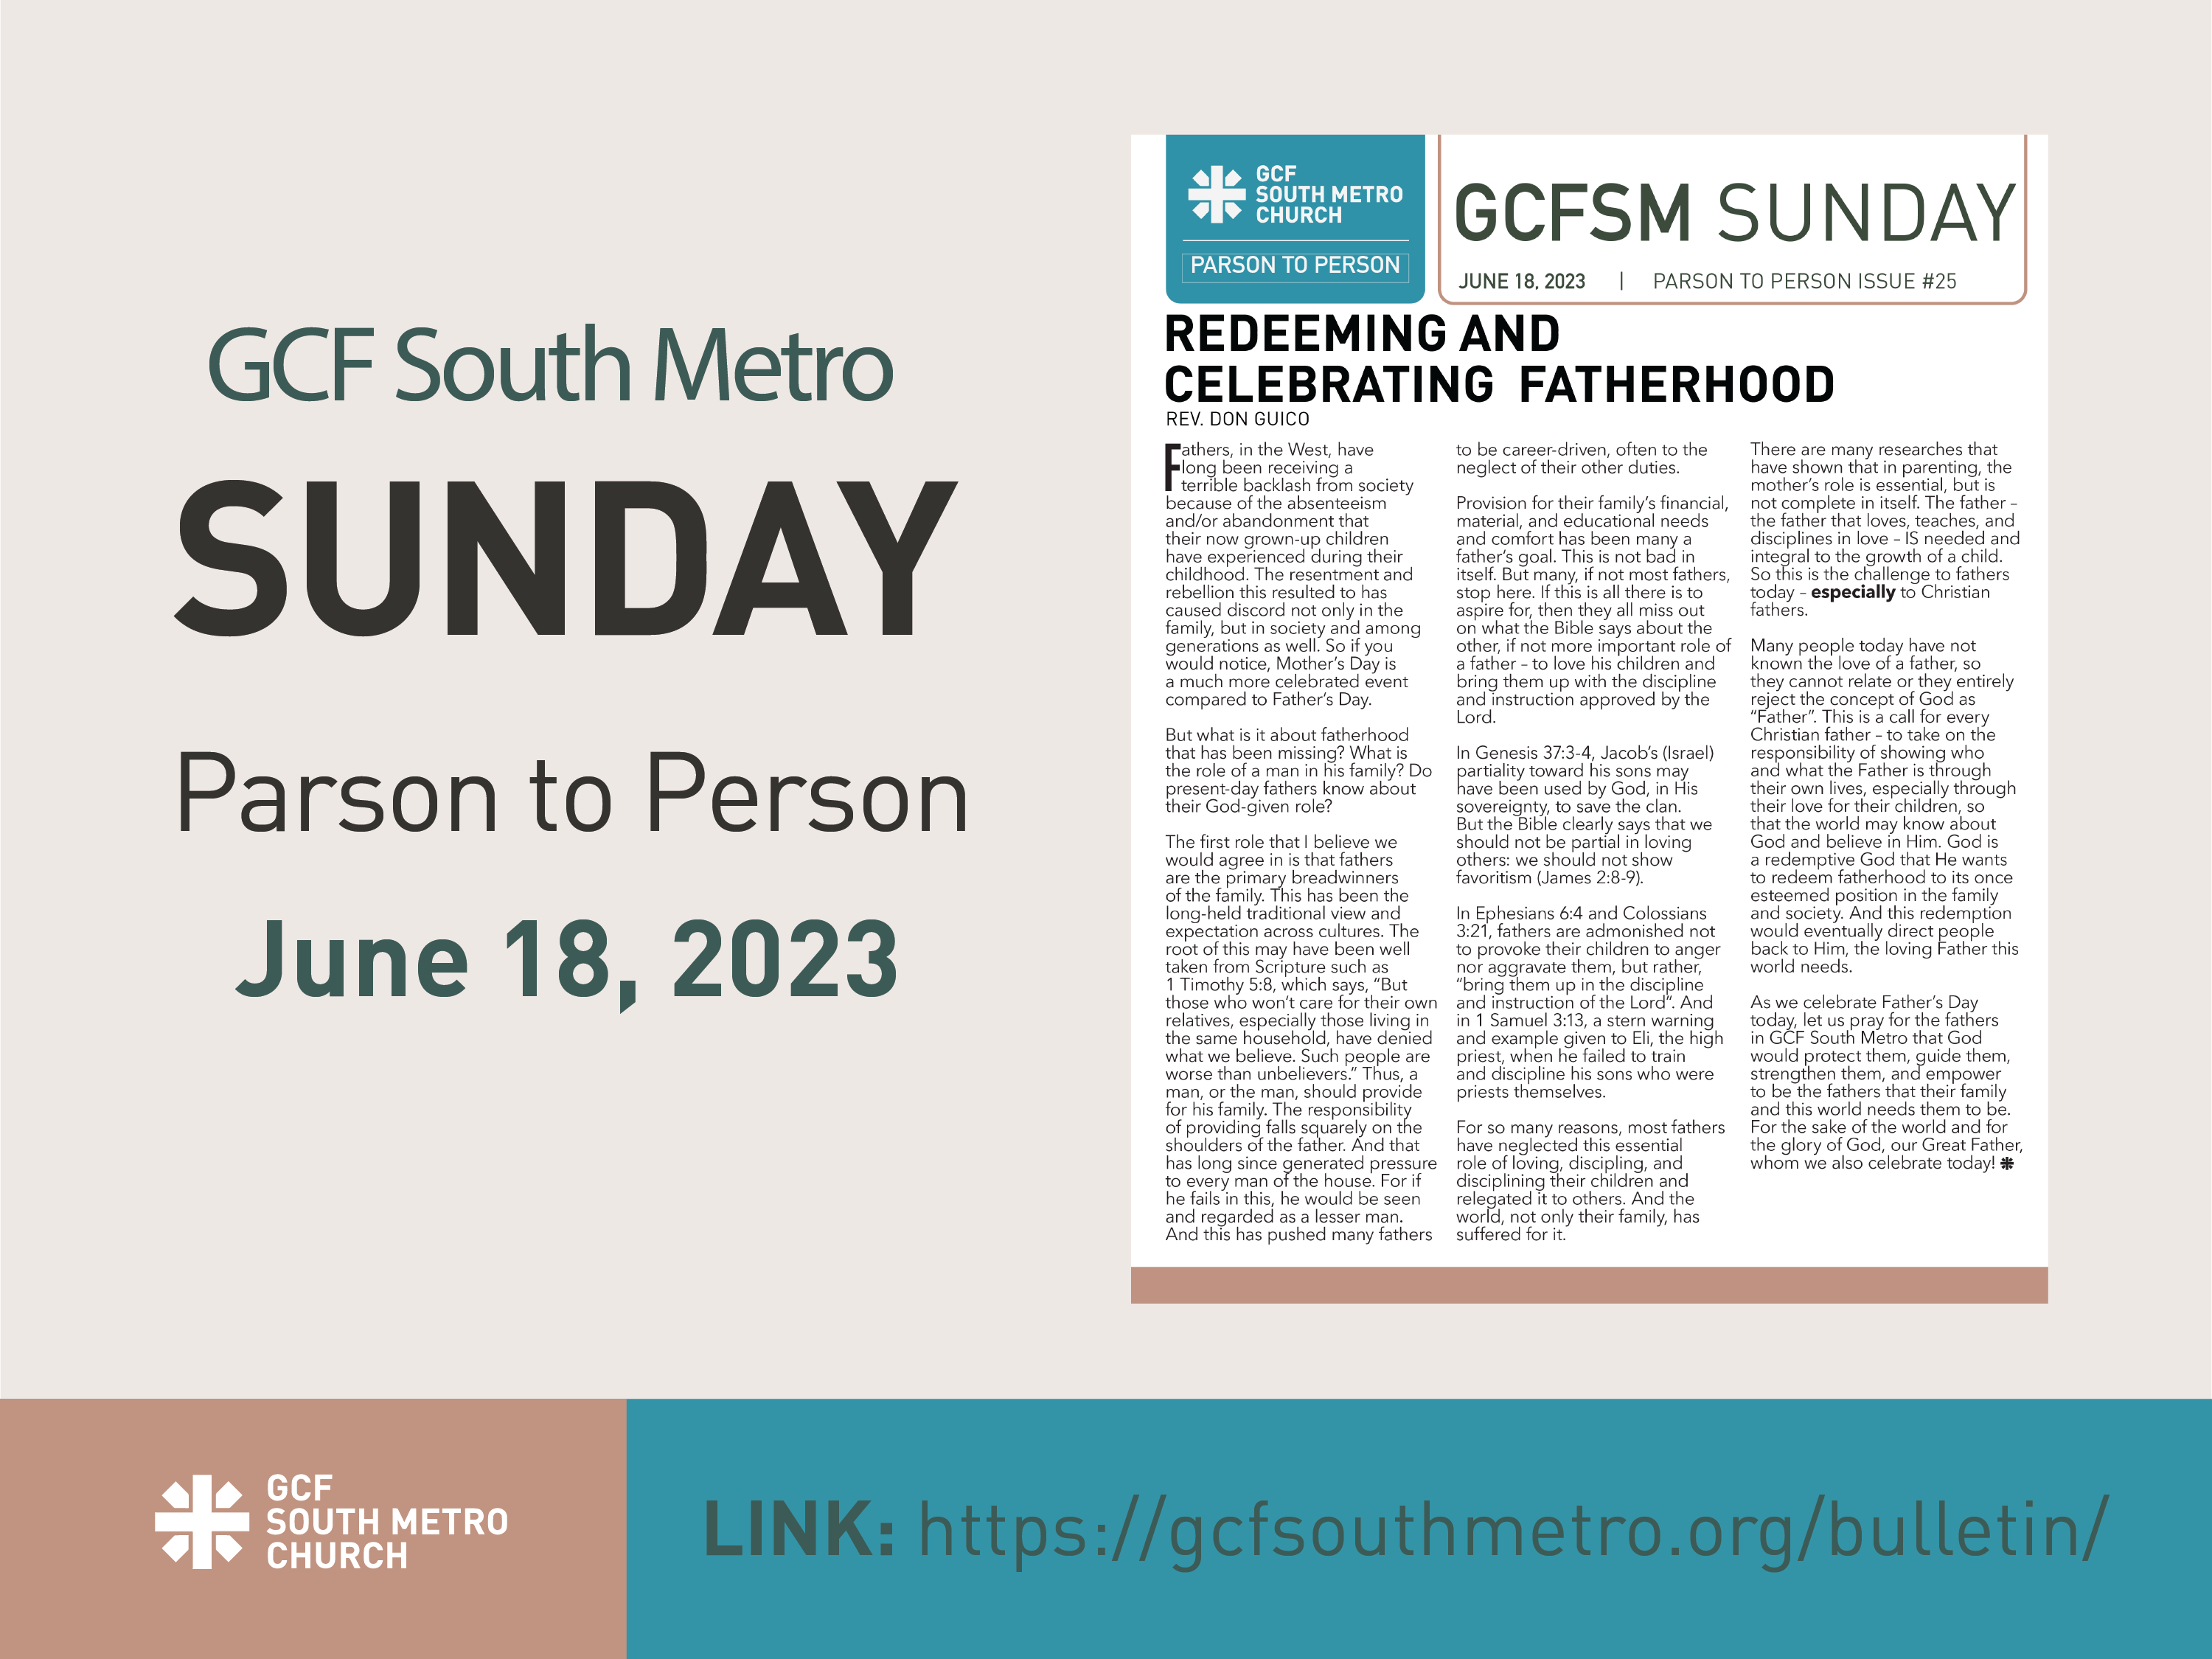 Sunday Bulletin – Parson to Person, June 18, 2023